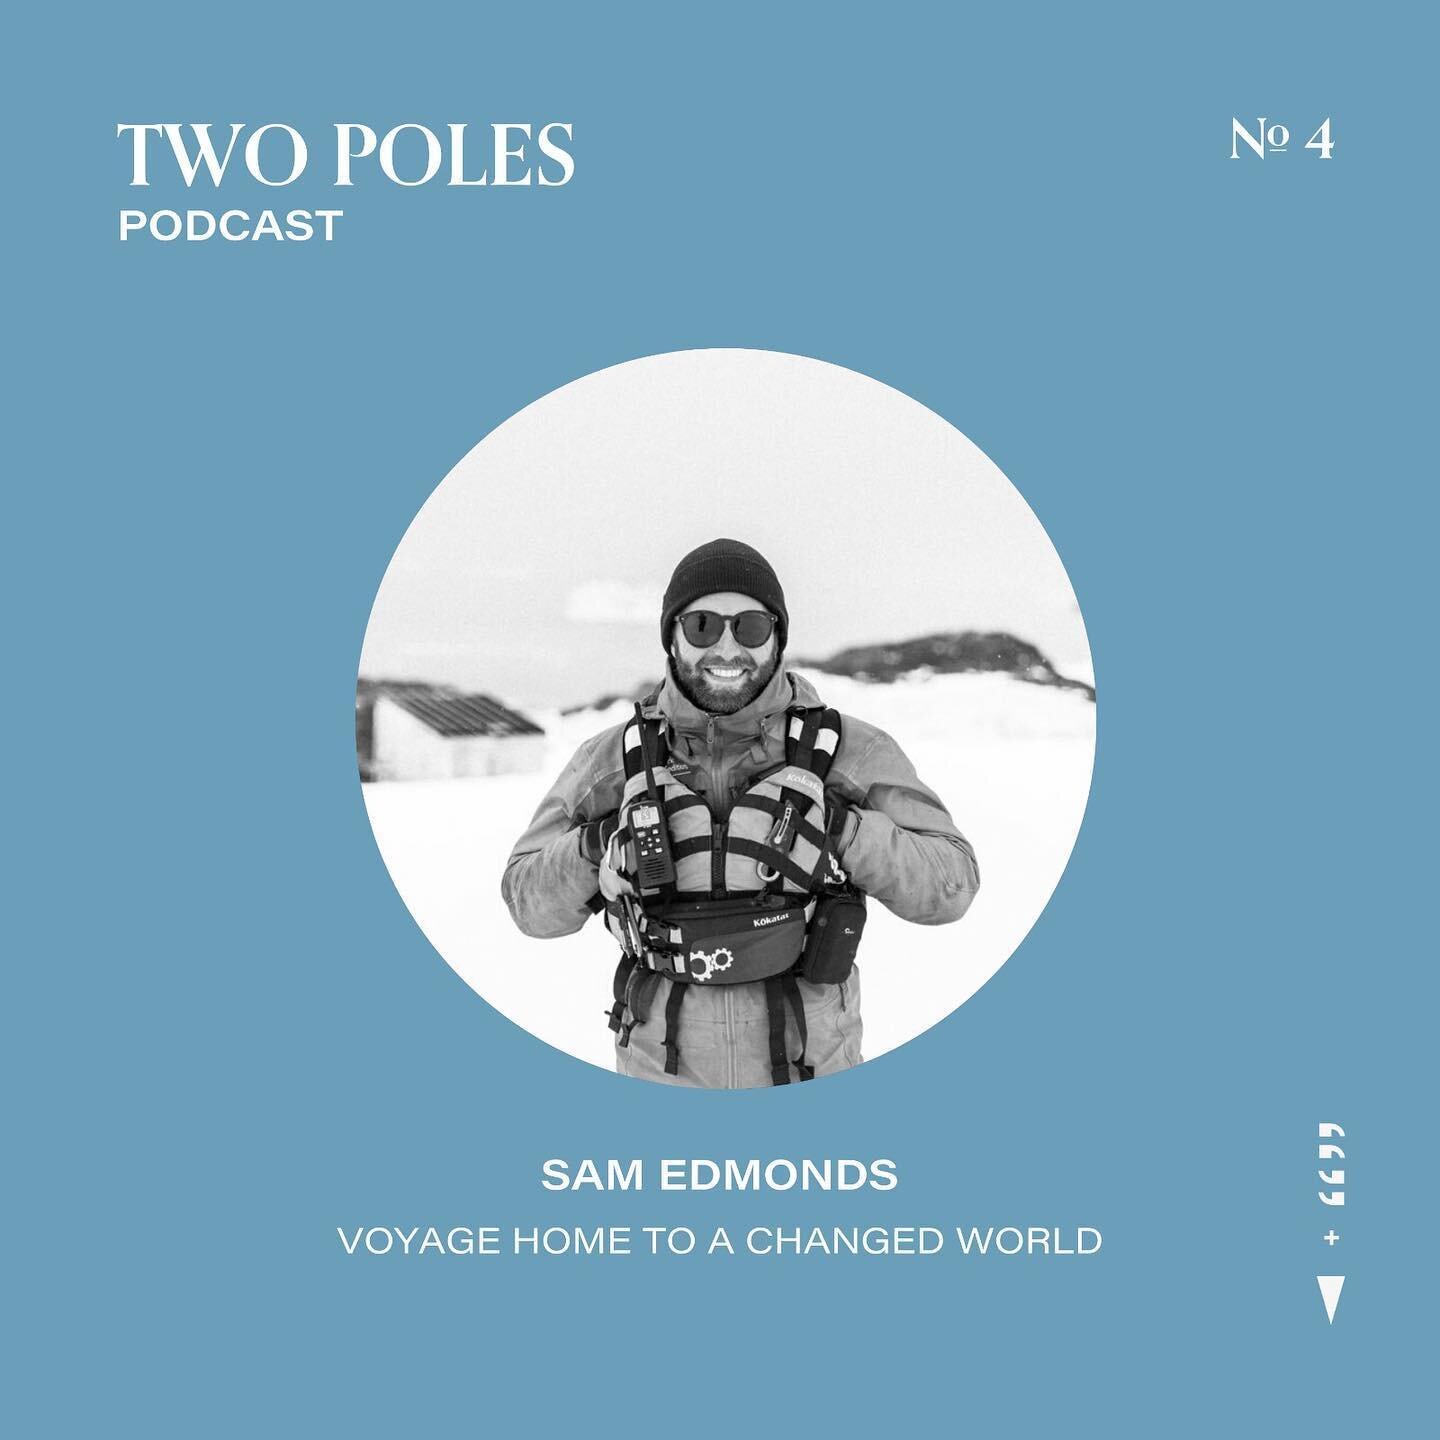 EPISODE 4

Recording this interview with @samedmondsstudio felt like capturing a timepiece of history. I think years from now when we look back on this moment, from a polar perspective this will be an important moment for ships and vessels and how th